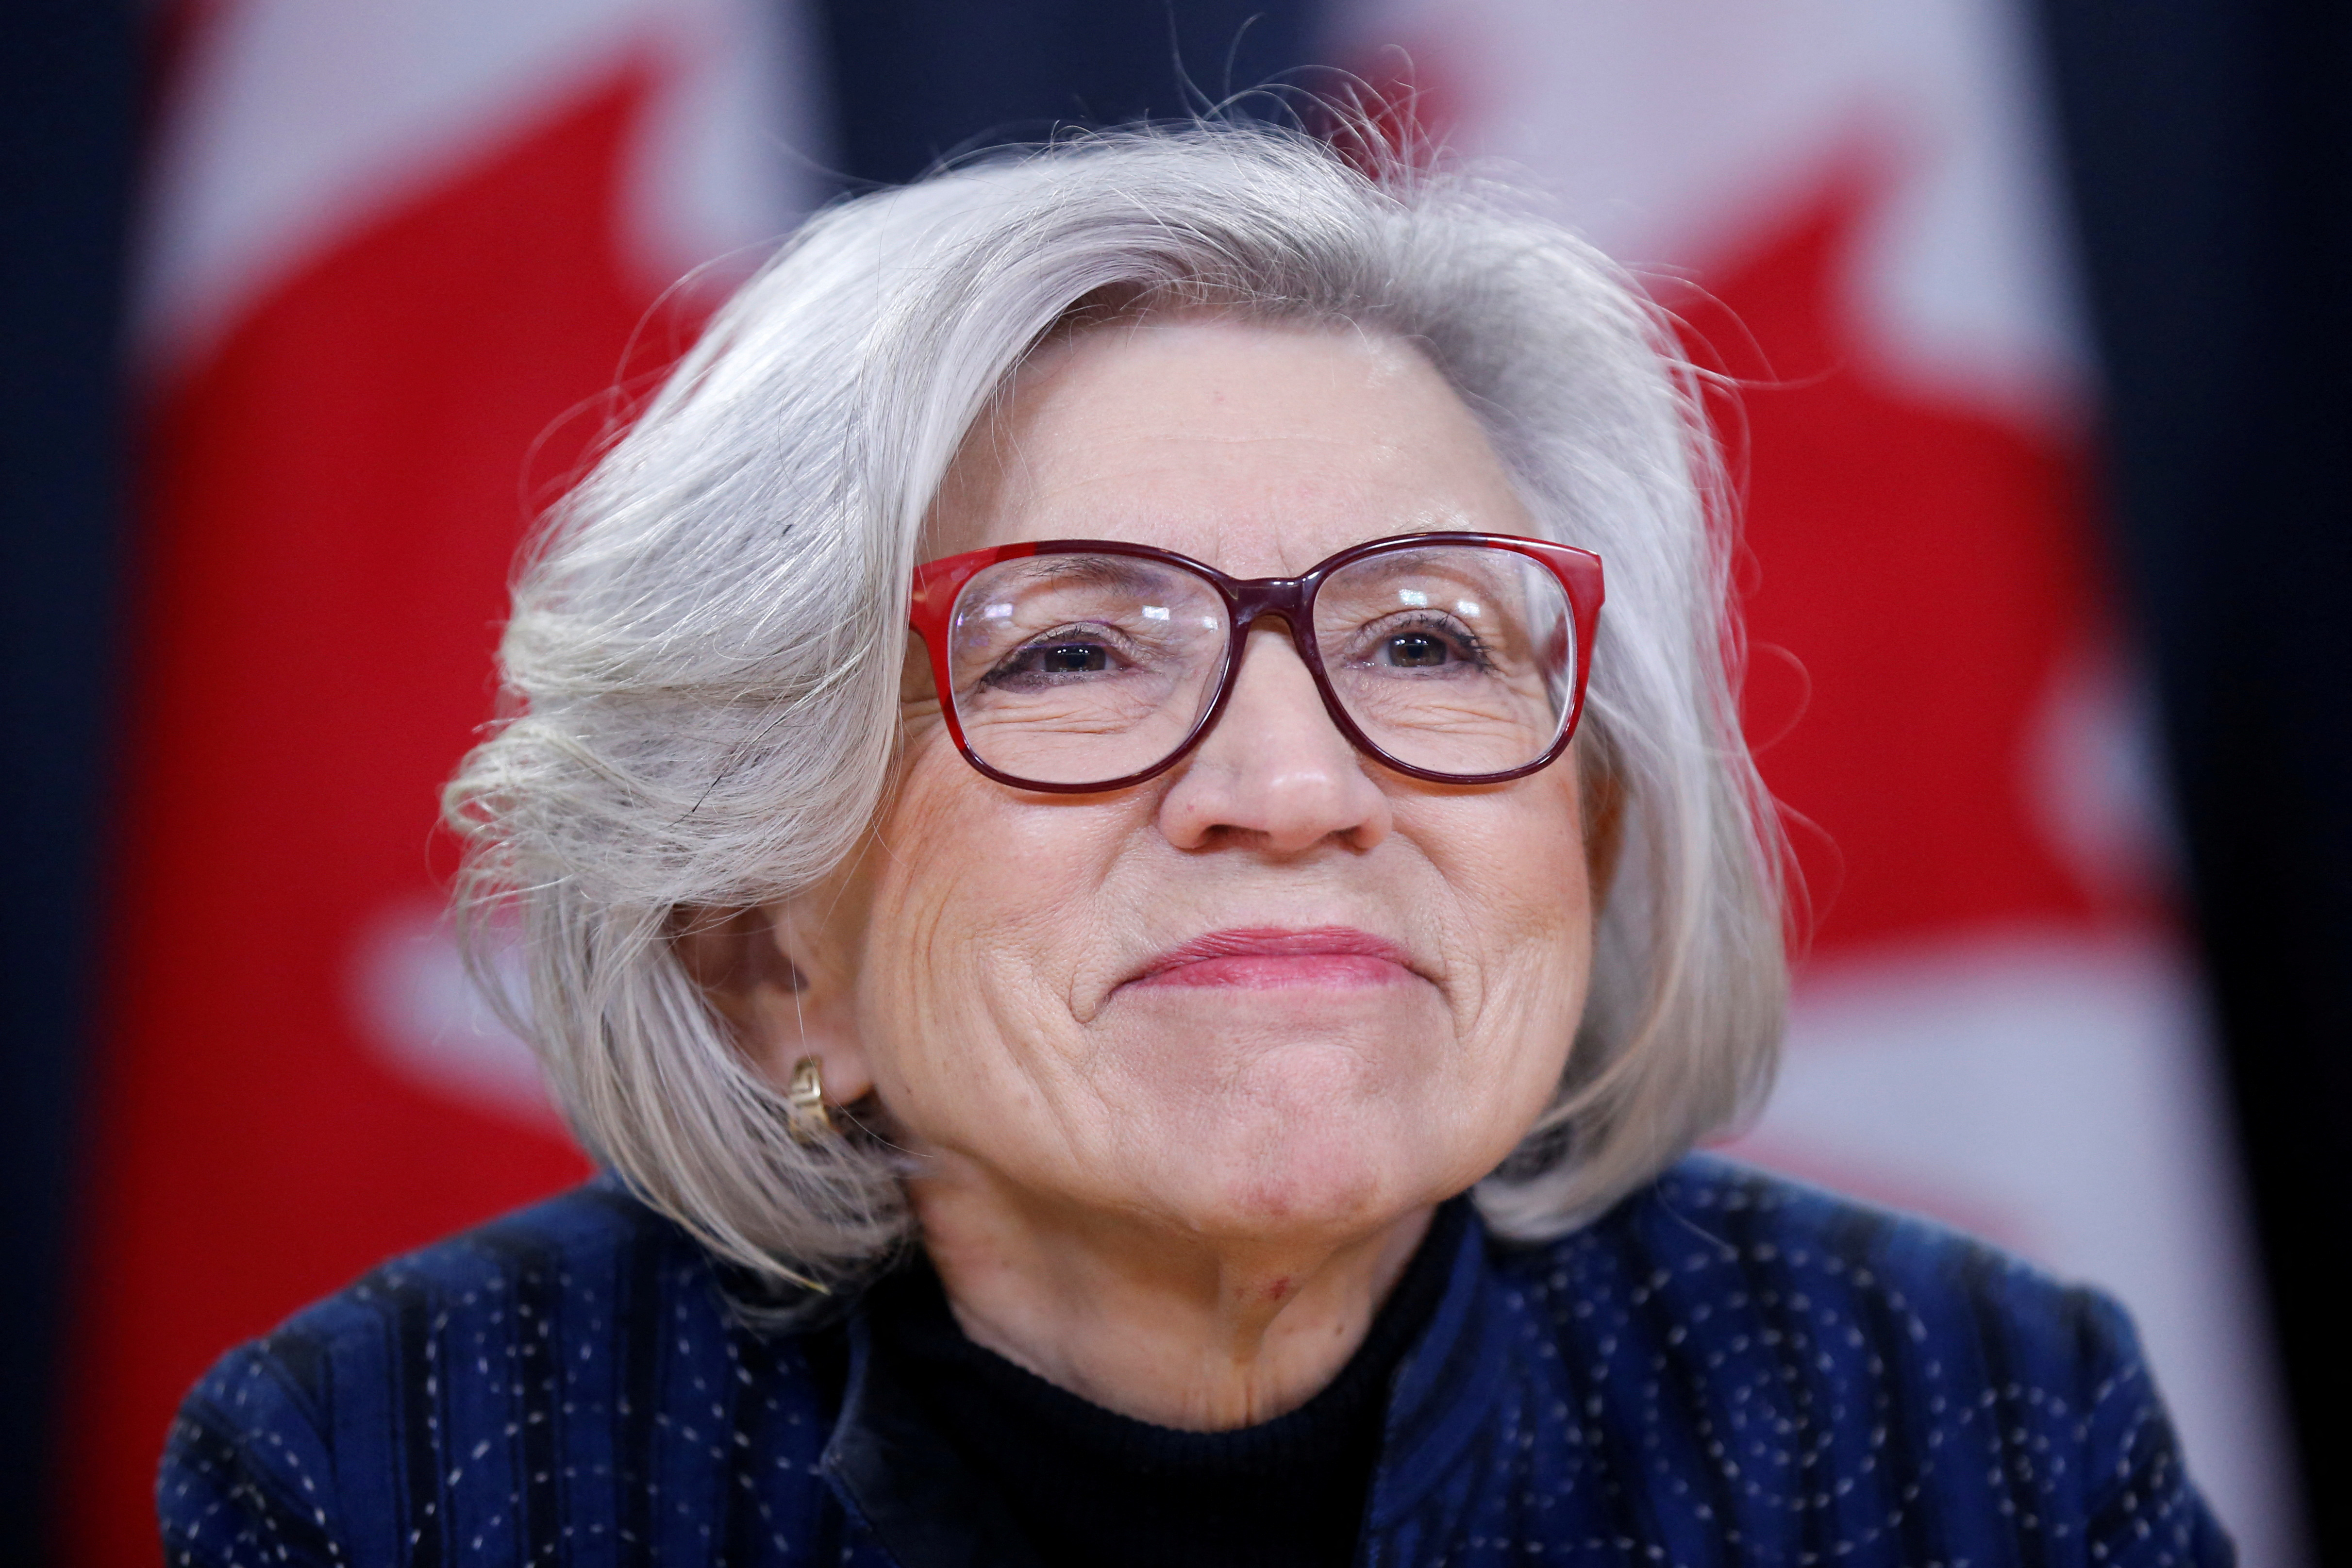 Canada's outgoing Supreme Court Chief Justice Beverley McLachlin takes part in a news conference in Ottawa